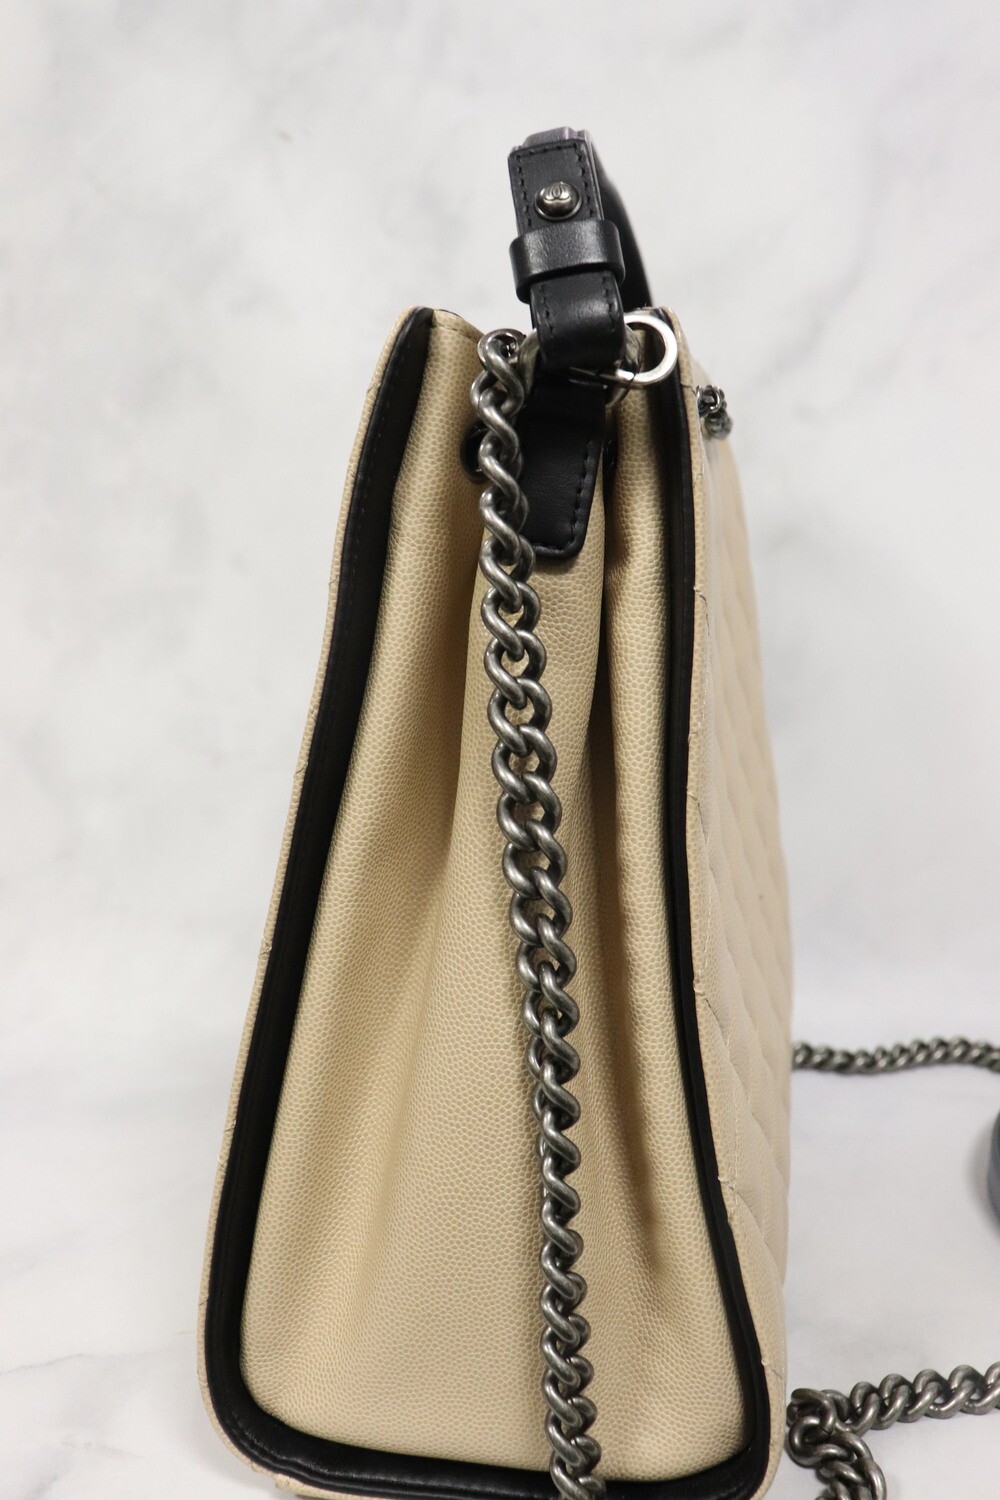 Chanel Bucket Bag Beige Caviar Leather, Black Trim, Ruthenium Hardware, Preowned in Dustbag